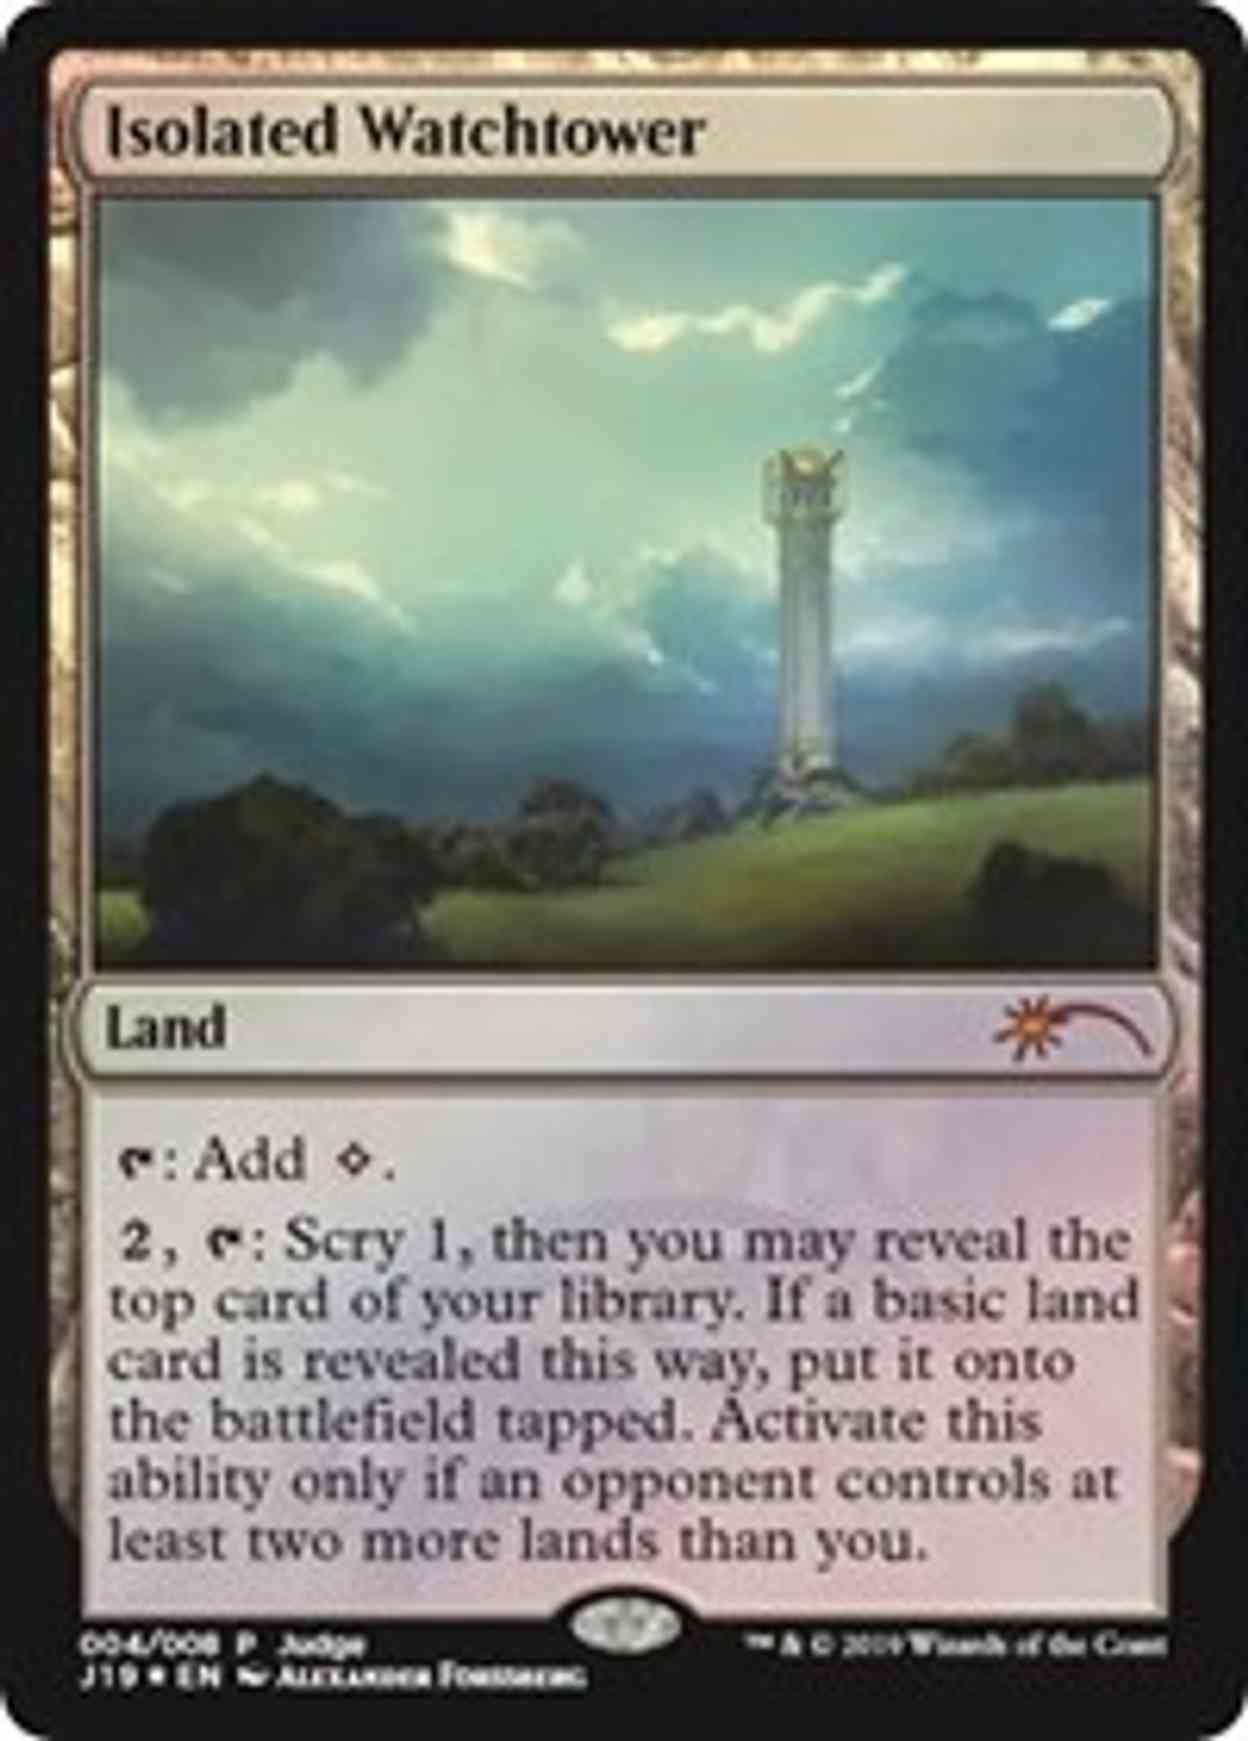 Isolated Watchtower magic card front